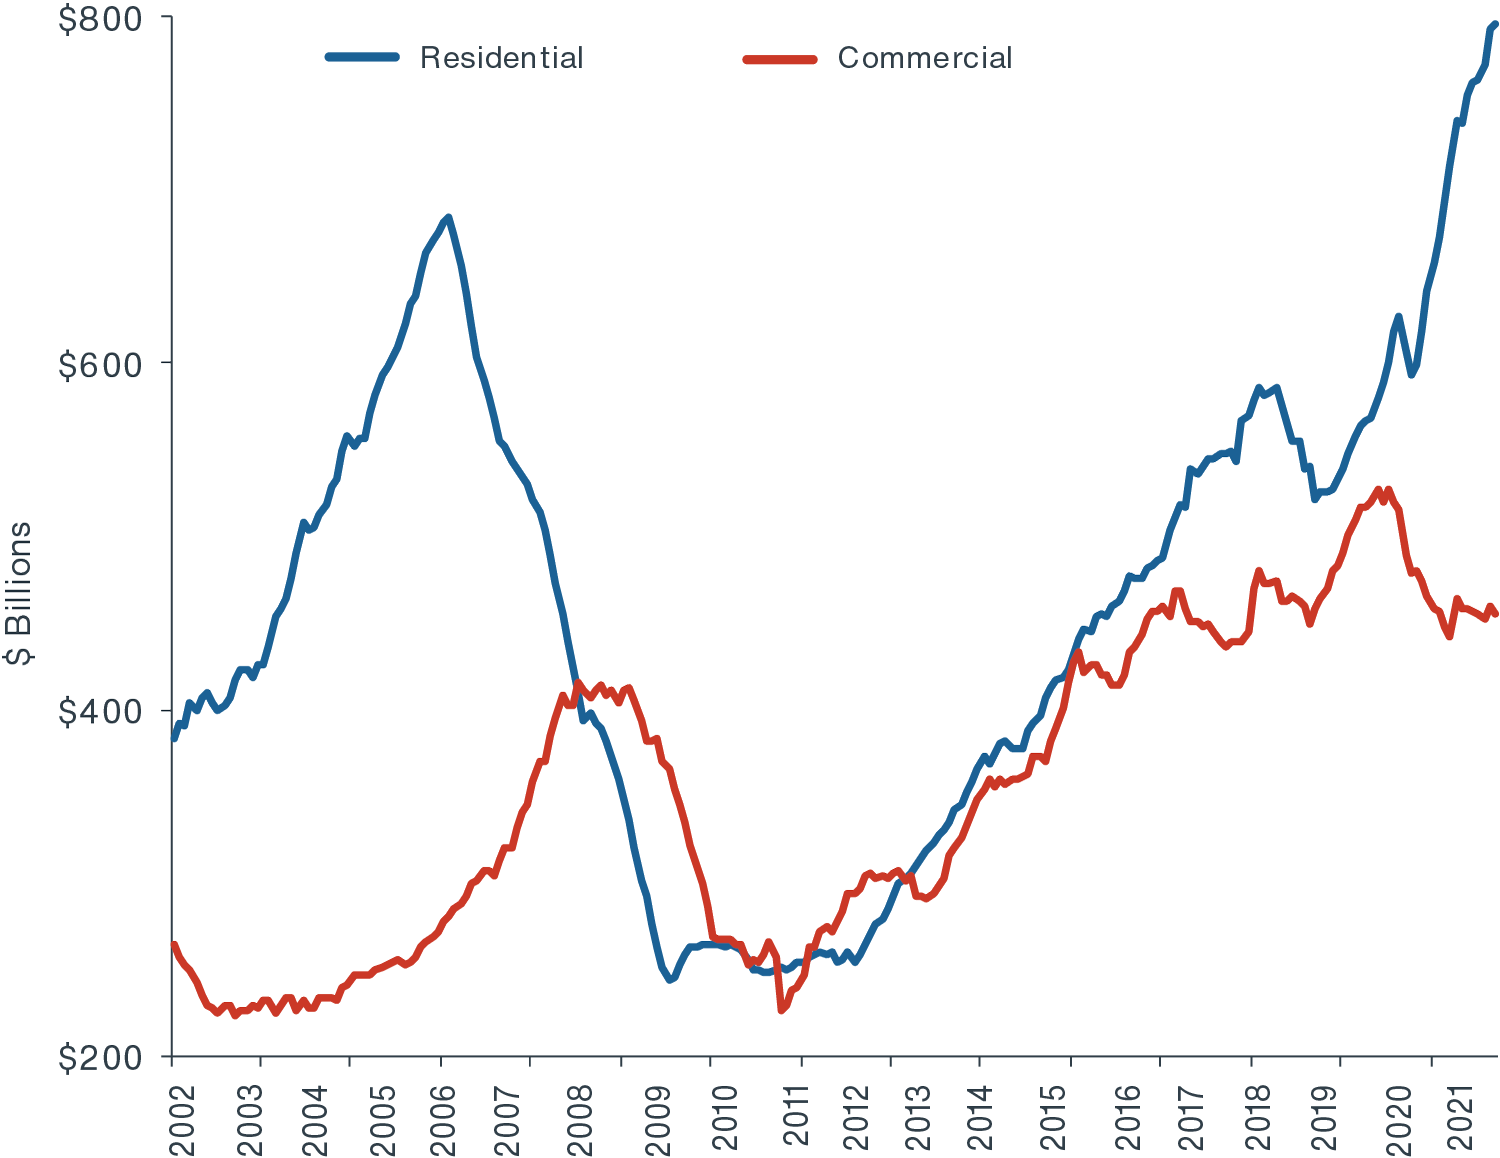 Chart showing peek of residential construction spending in 2021 vs. past years